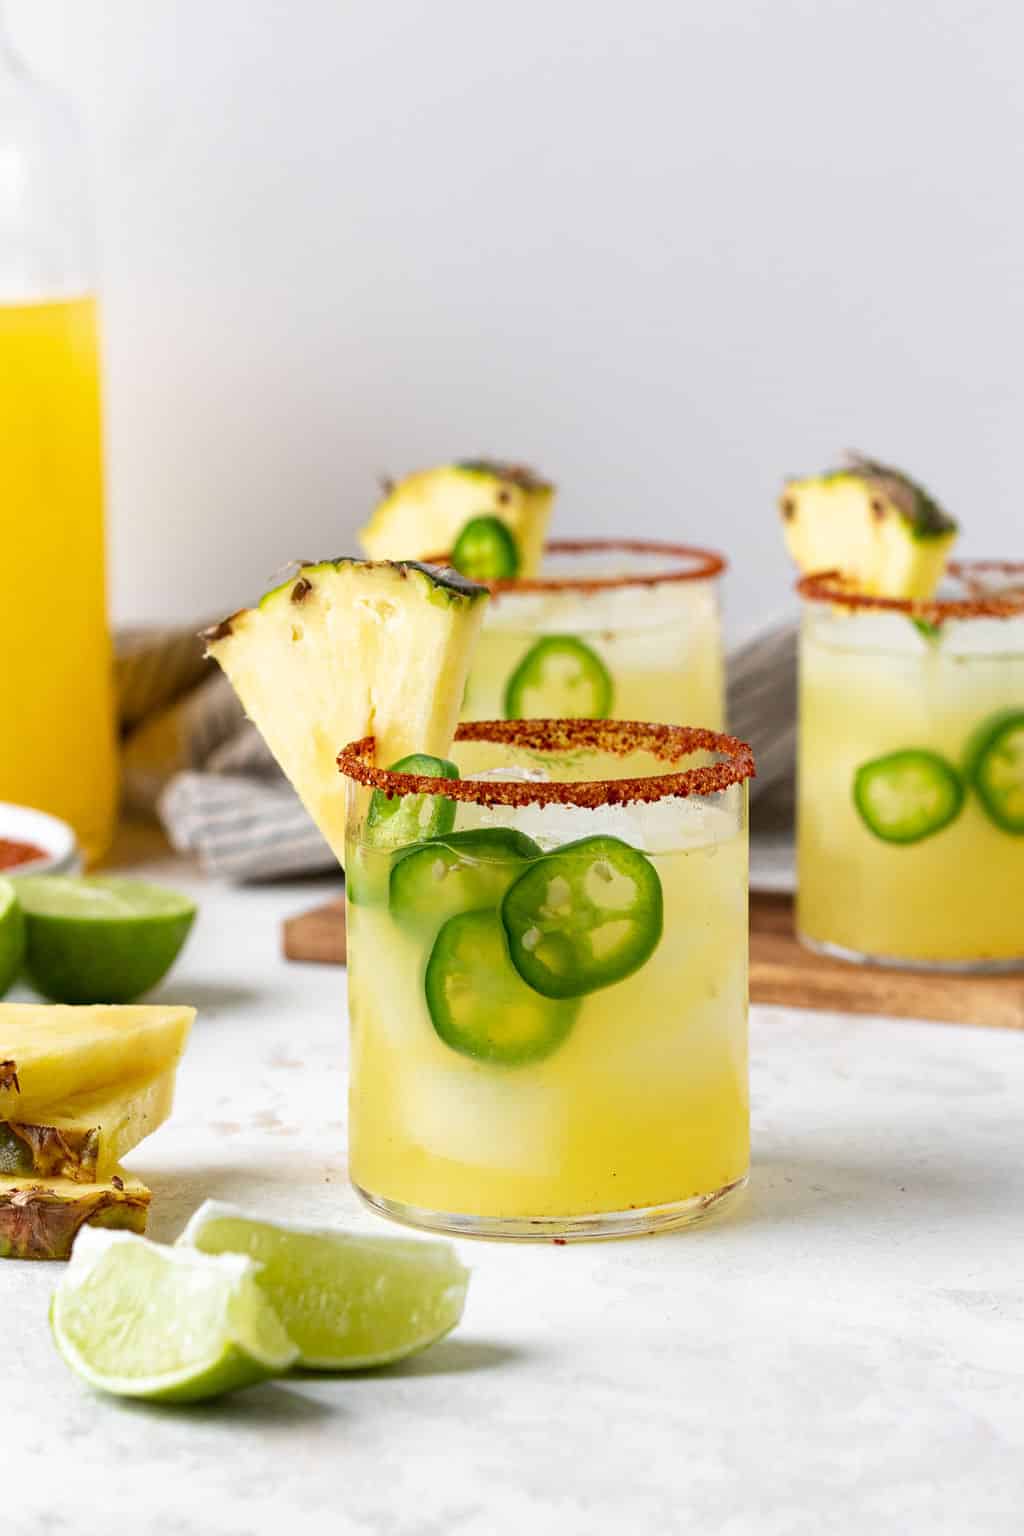 Spicy pineapple margarita with jalapenos and pineapple.